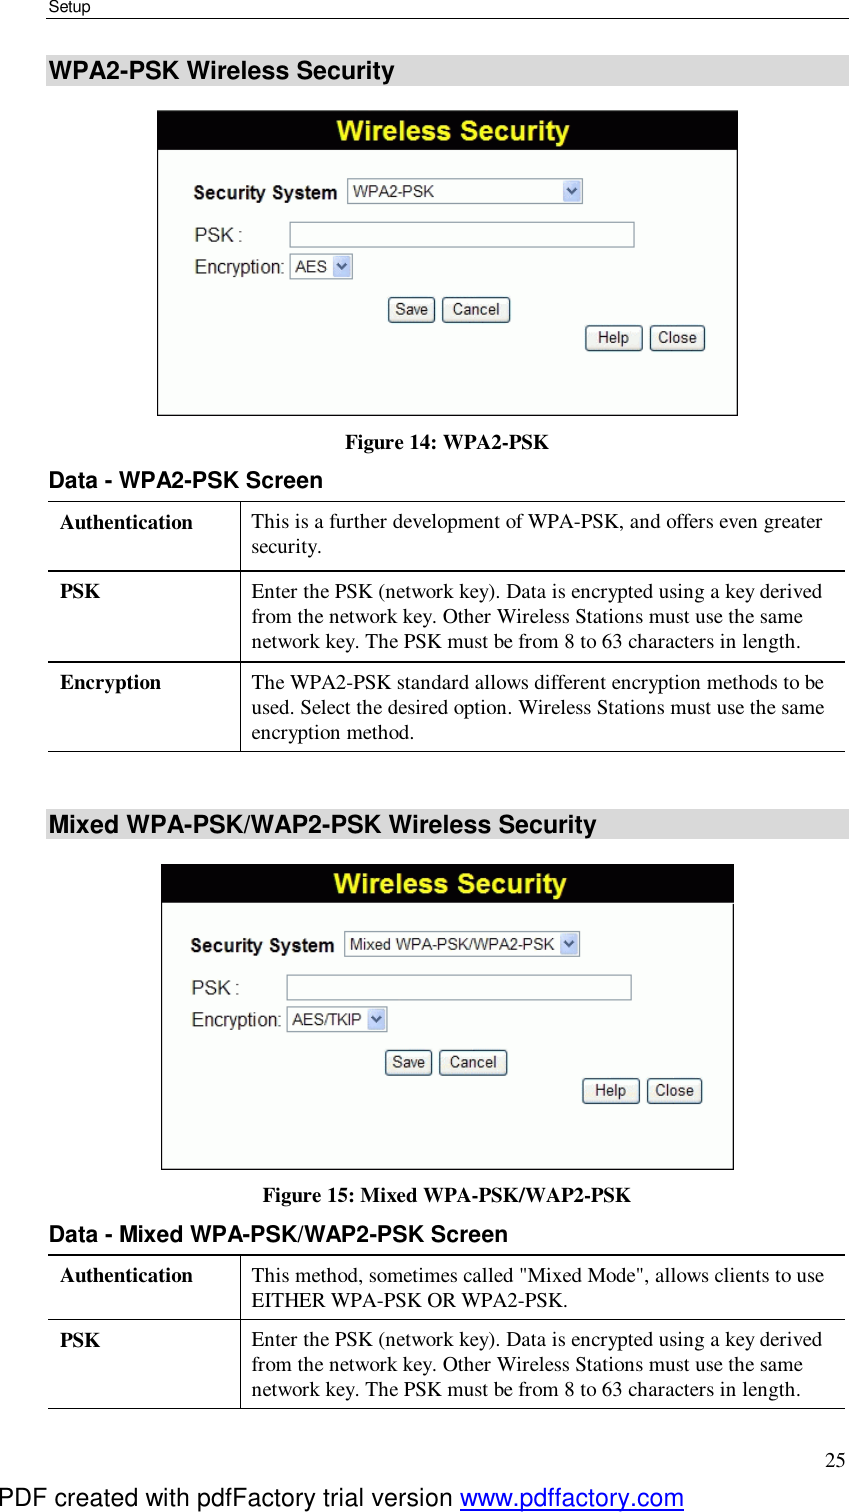 Setup 25 WPA2-PSK Wireless Security  Figure 14: WPA2-PSK Data - WPA2-PSK Screen Authentication  This is a further development of WPA-PSK, and offers even greater security. PSK  Enter the PSK (network key). Data is encrypted using a key derived from the network key. Other Wireless Stations must use the same network key. The PSK must be from 8 to 63 characters in length. Encryption  The WPA2-PSK standard allows different encryption methods to be used. Select the desired option. Wireless Stations must use the same encryption method.  Mixed WPA-PSK/WAP2-PSK Wireless Security  Figure 15: Mixed WPA-PSK/WAP2-PSK Data - Mixed WPA-PSK/WAP2-PSK Screen Authentication  This method, sometimes called &quot;Mixed Mode&quot;, allows clients to use EITHER WPA-PSK OR WPA2-PSK. PSK  Enter the PSK (network key). Data is encrypted using a key derived from the network key. Other Wireless Stations must use the same network key. The PSK must be from 8 to 63 characters in length. PDF created with pdfFactory trial version www.pdffactory.com